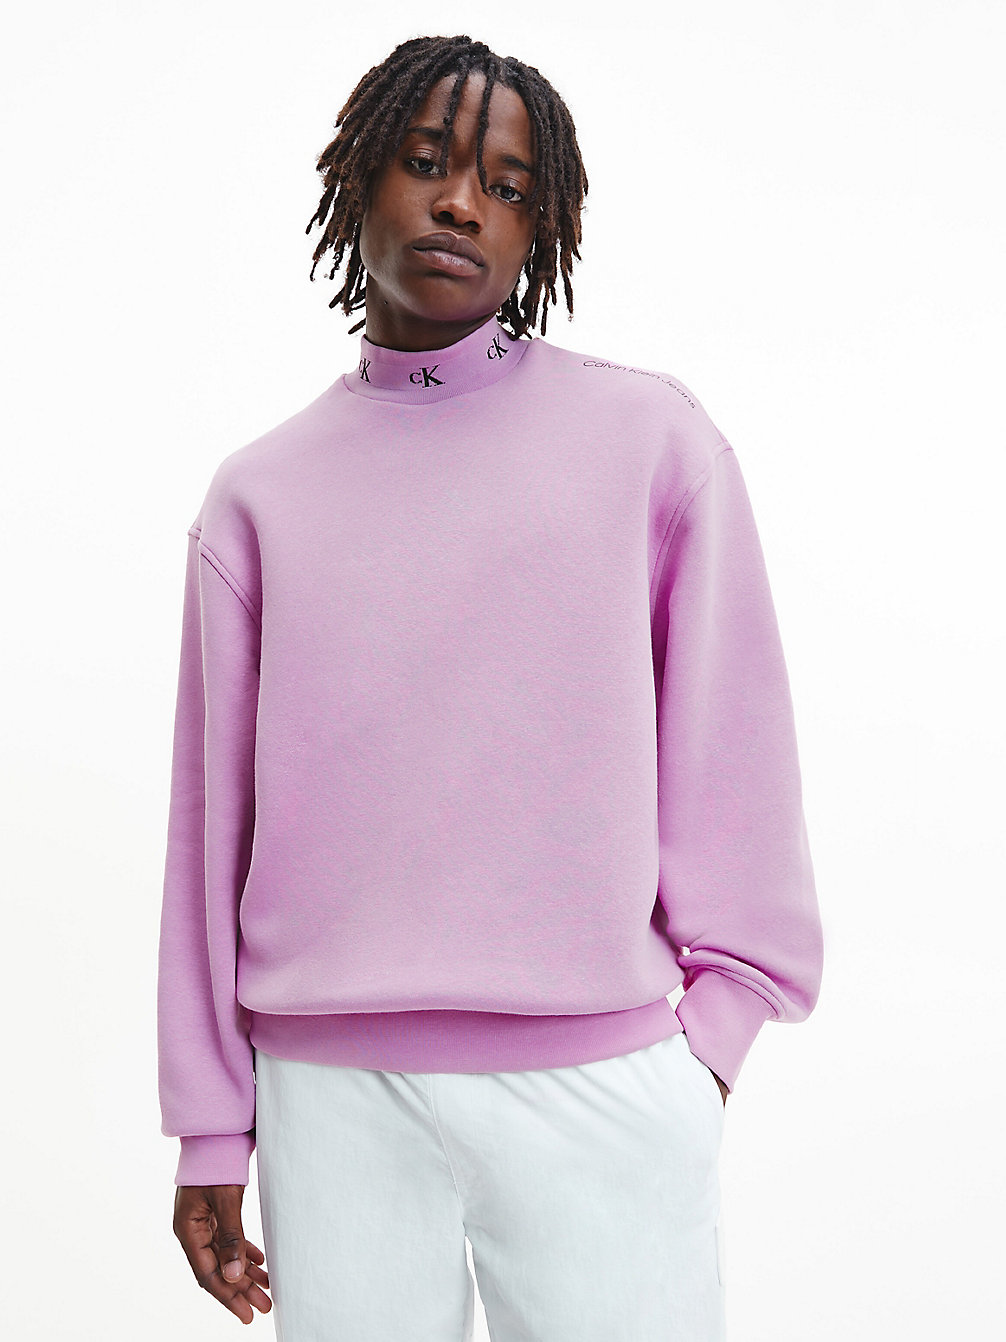 Sweat Relaxed Avec Logo Au Col > IRIS ORCHID > undefined hommes > Calvin Klein